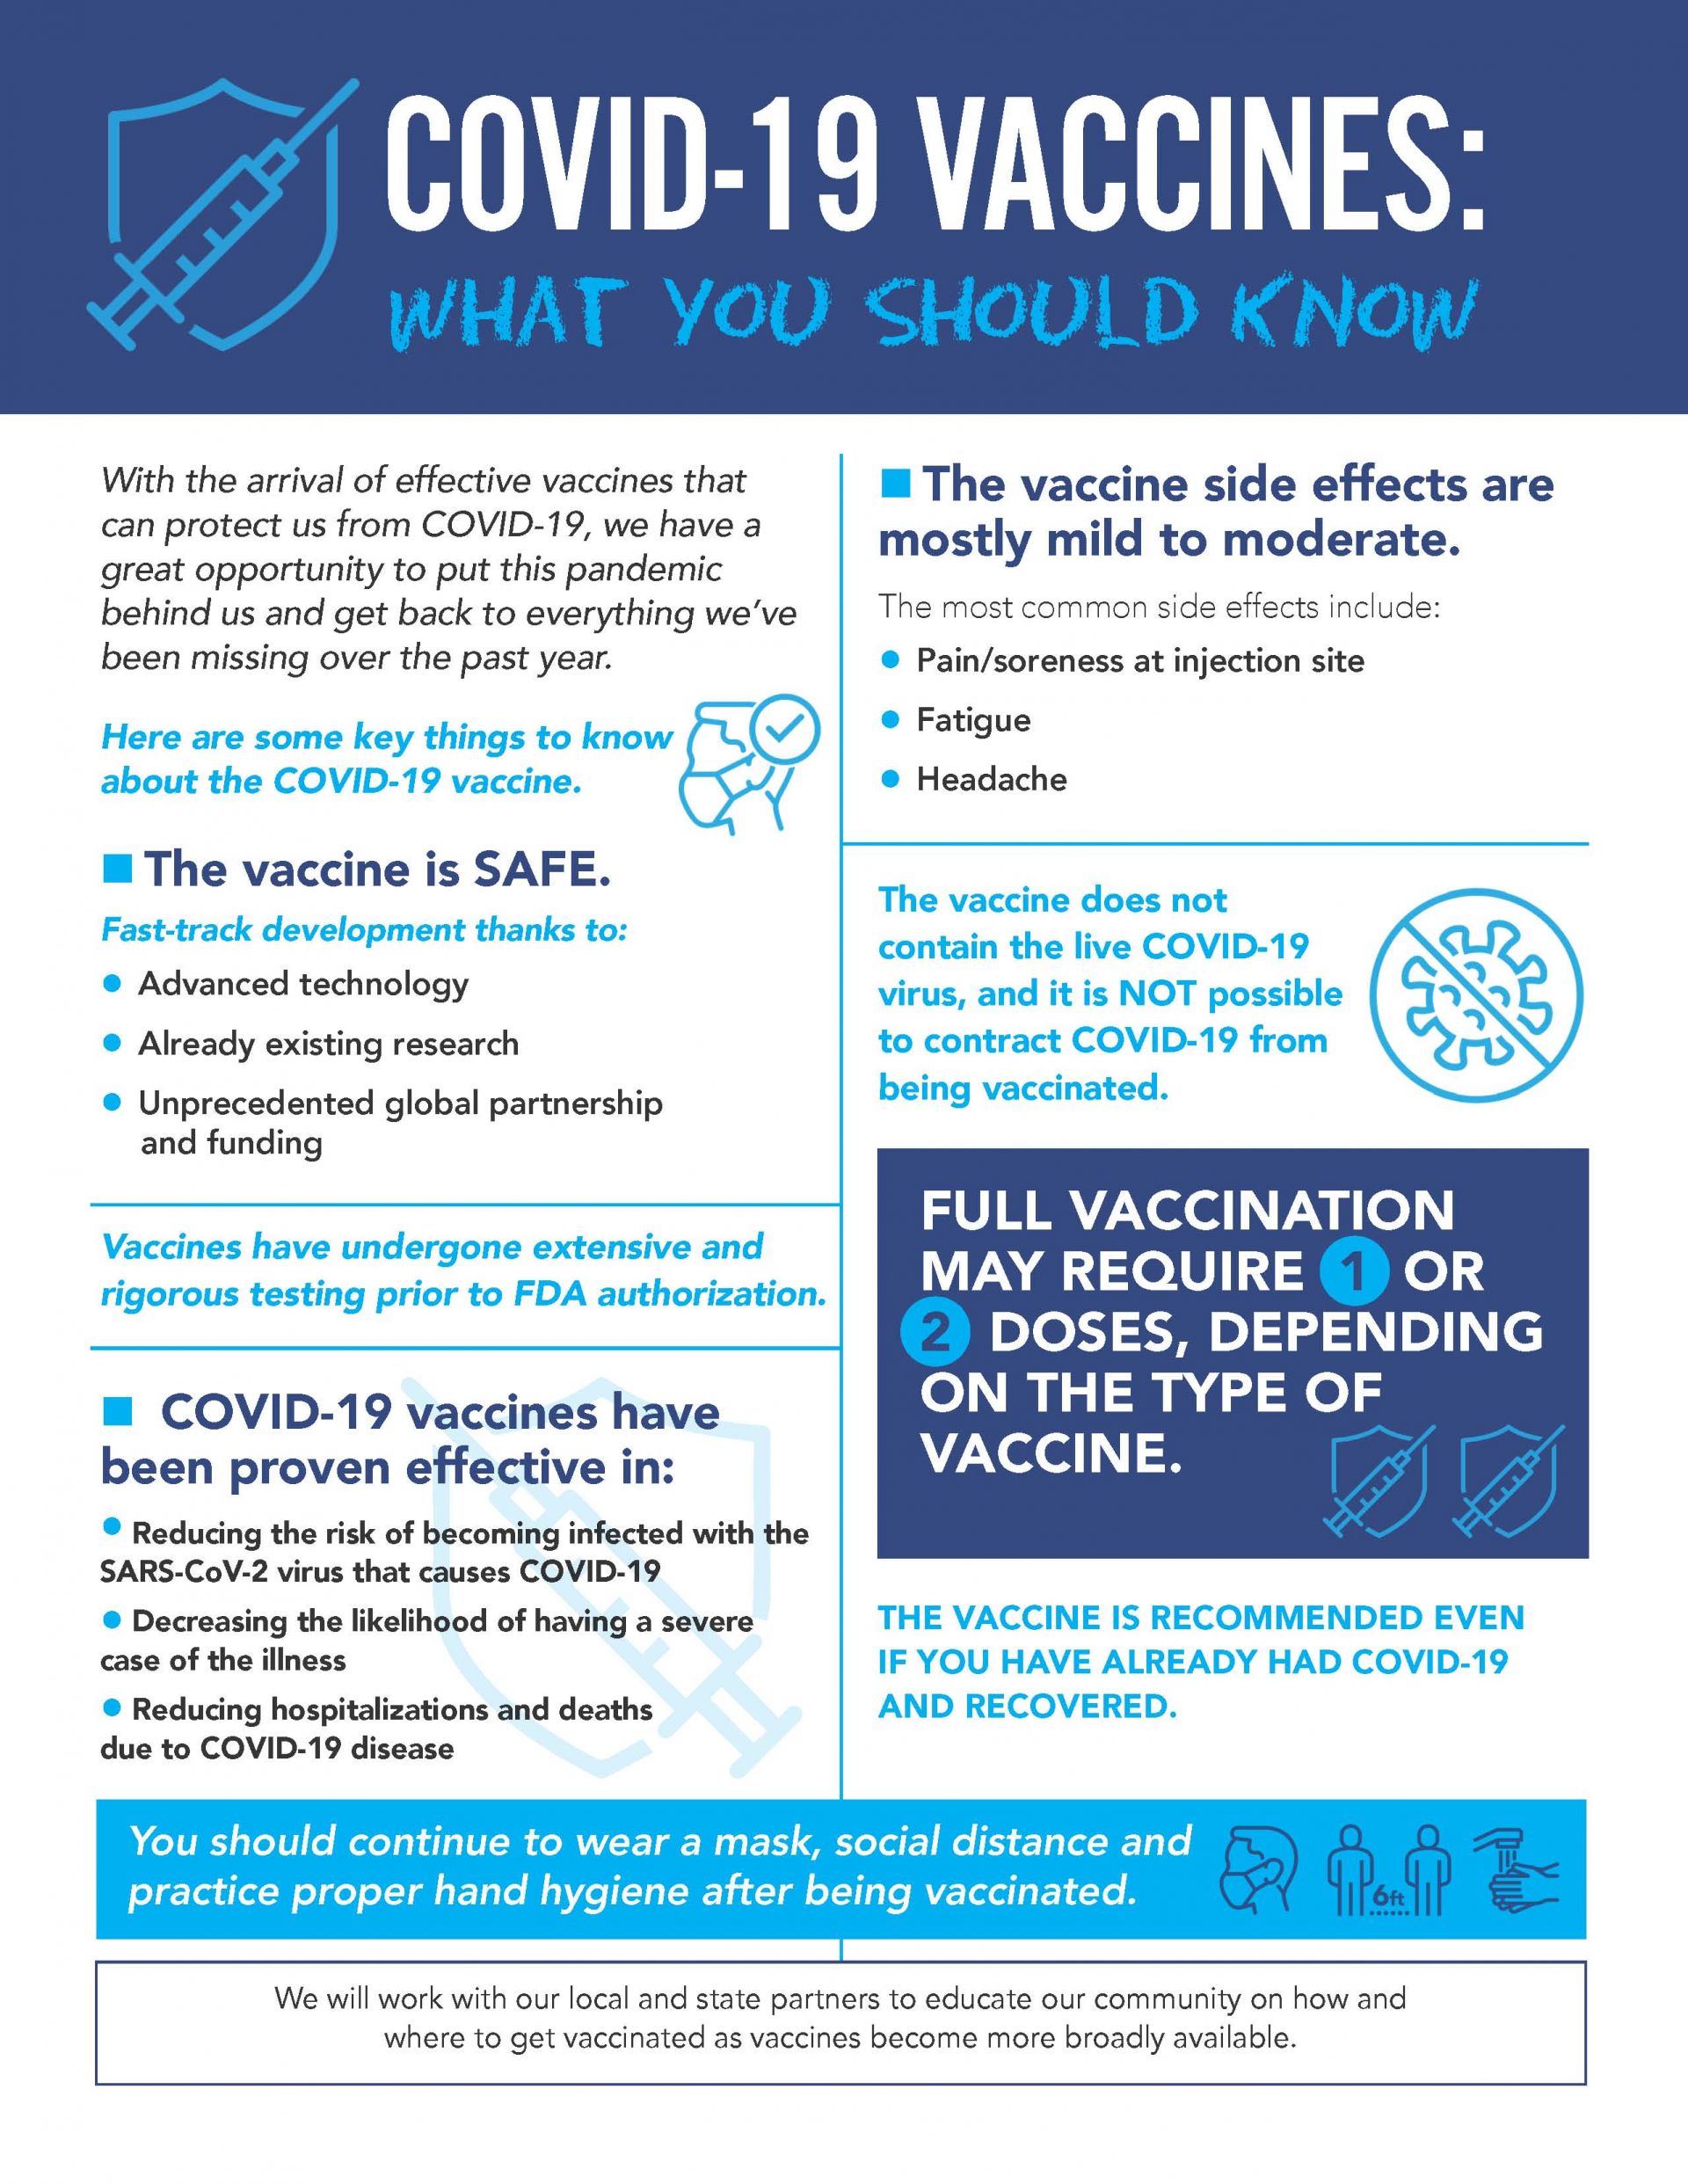 Covid-19 Vaccines: What you should know